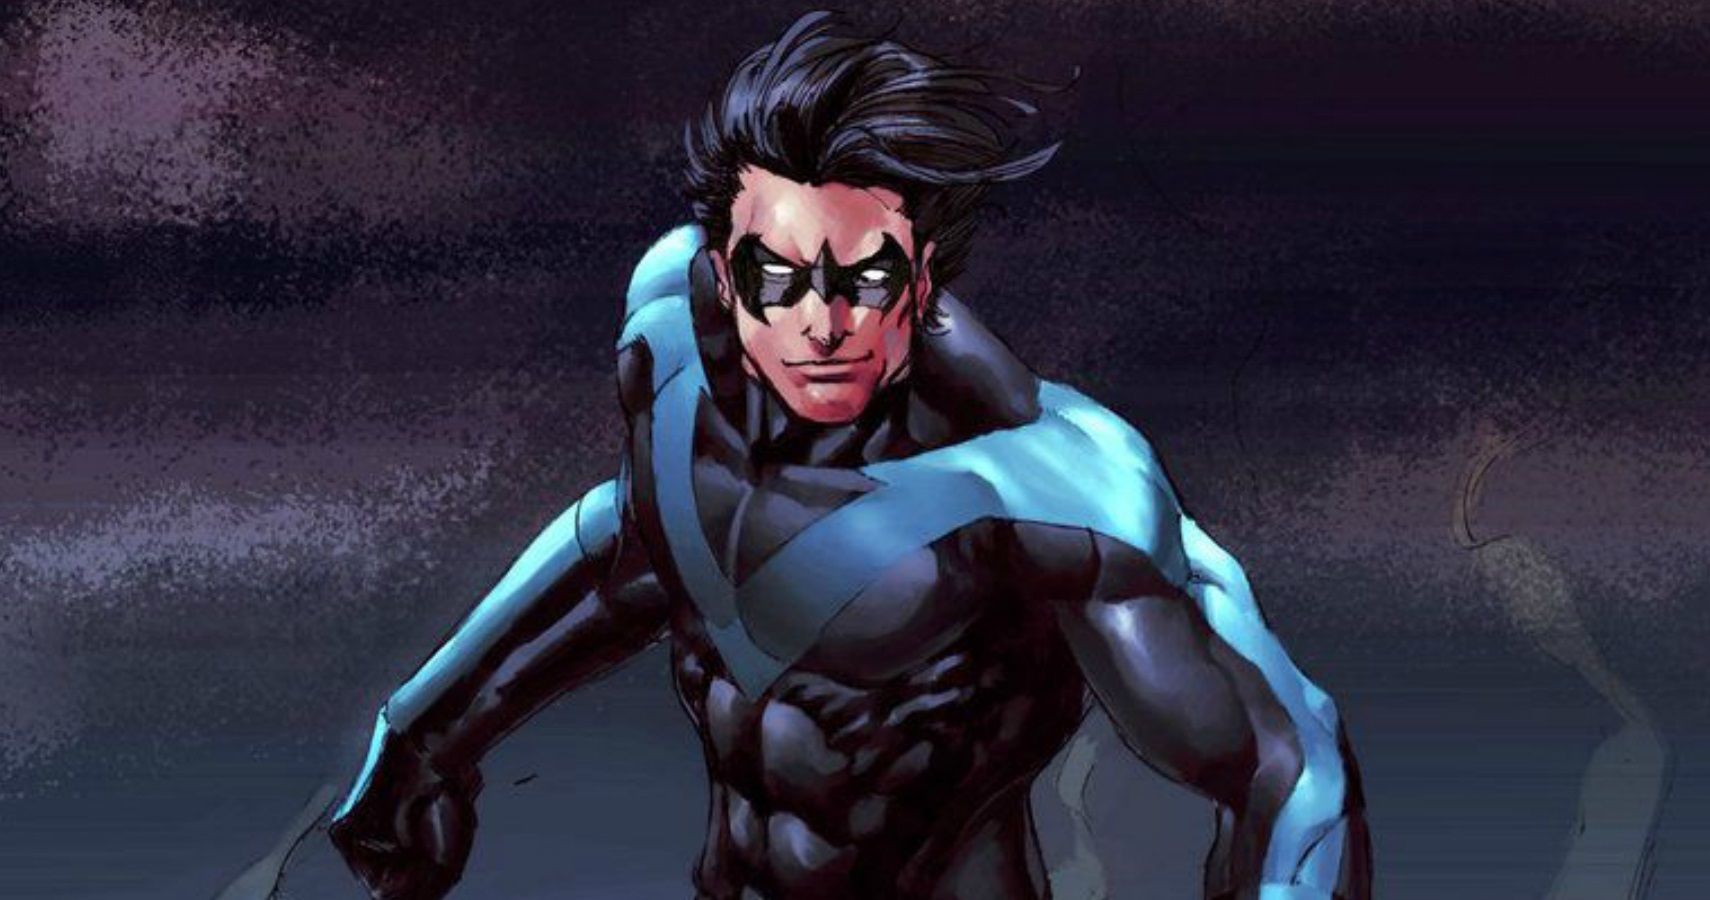 A Complete Timeline Of Nightwing & Batgirl's Romantic History